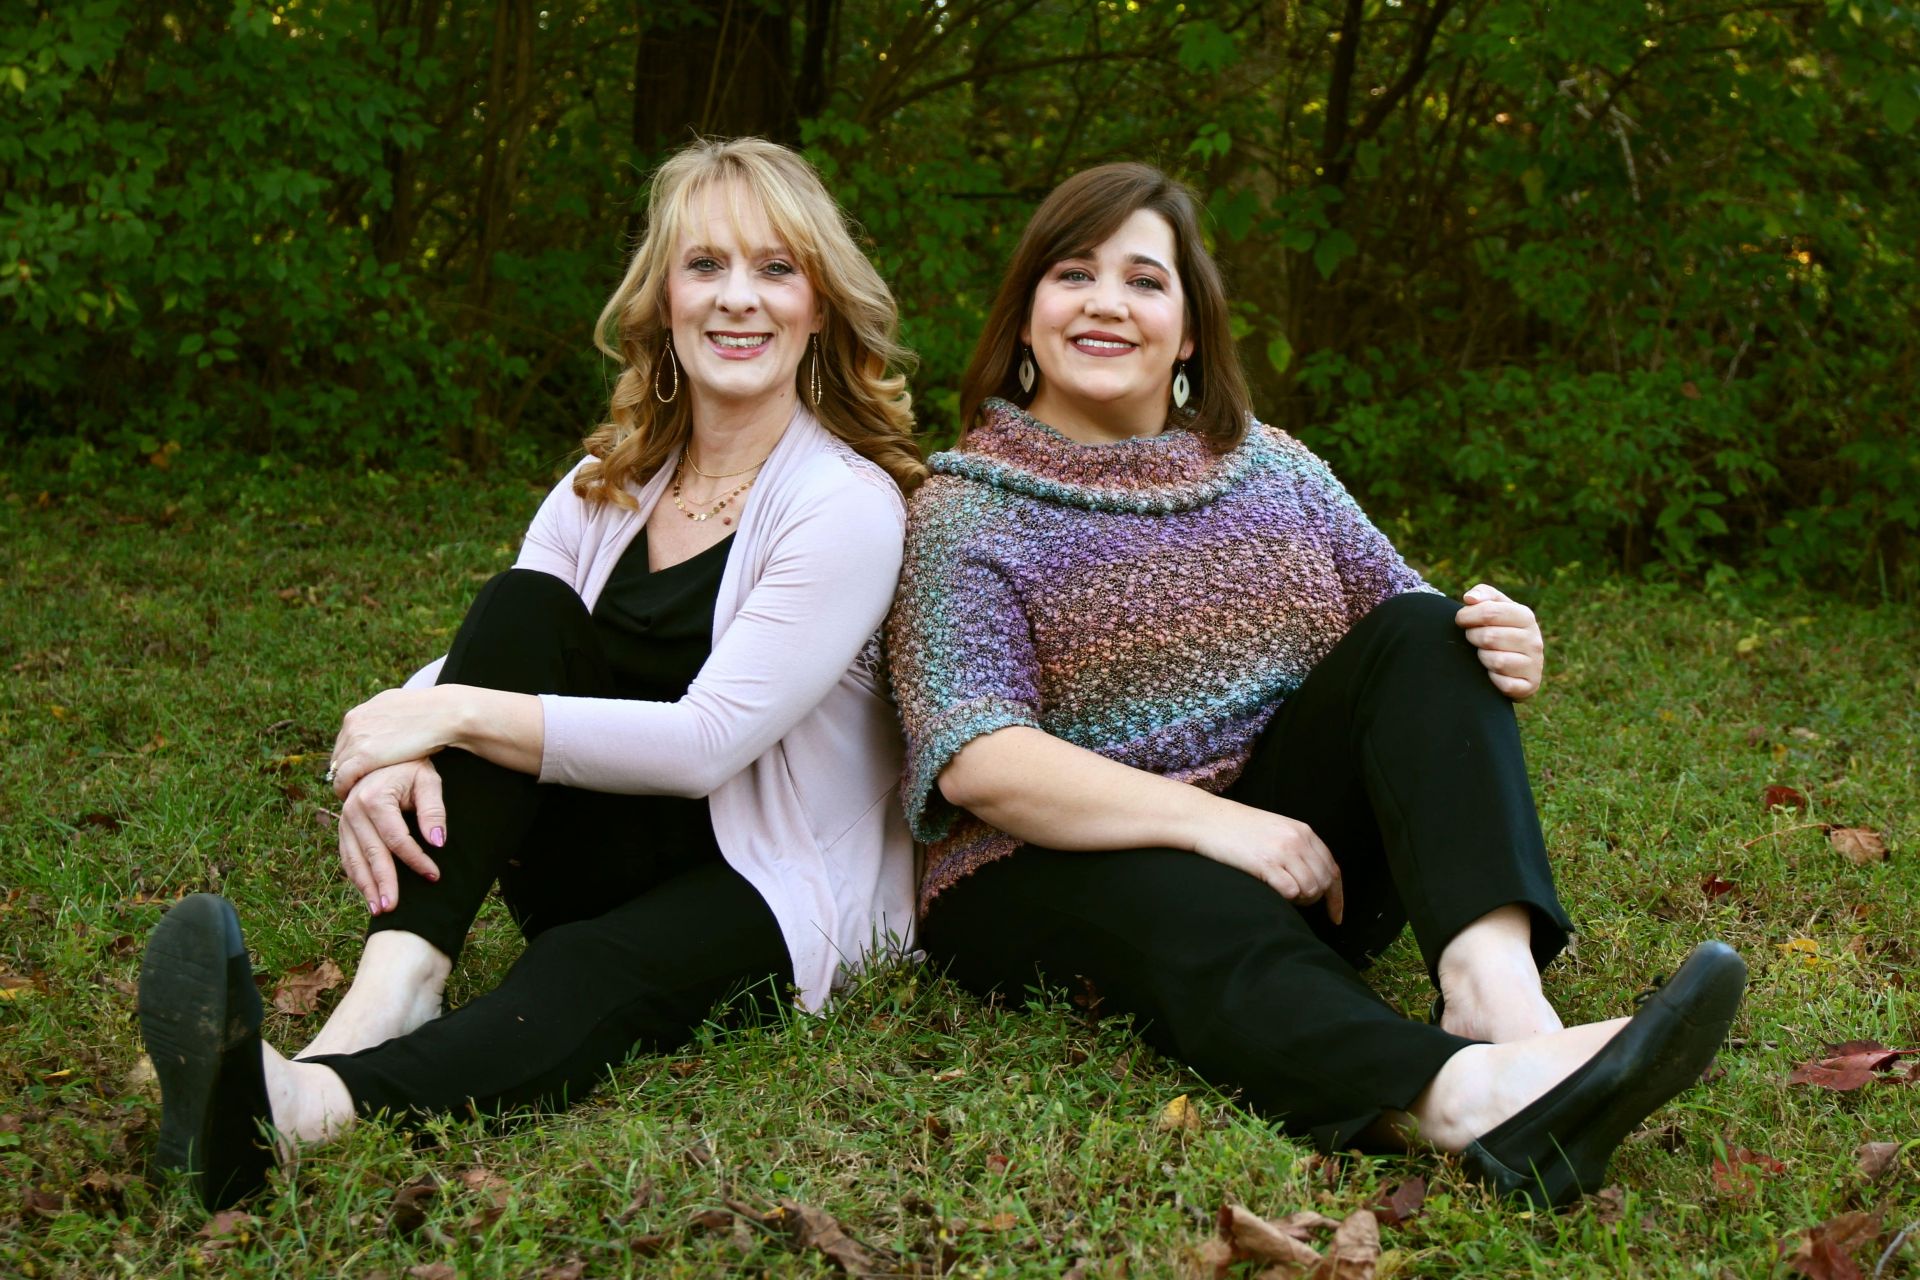 photo of Kimberly Breeden and Niccole Rowe sitting in grass, side by side 